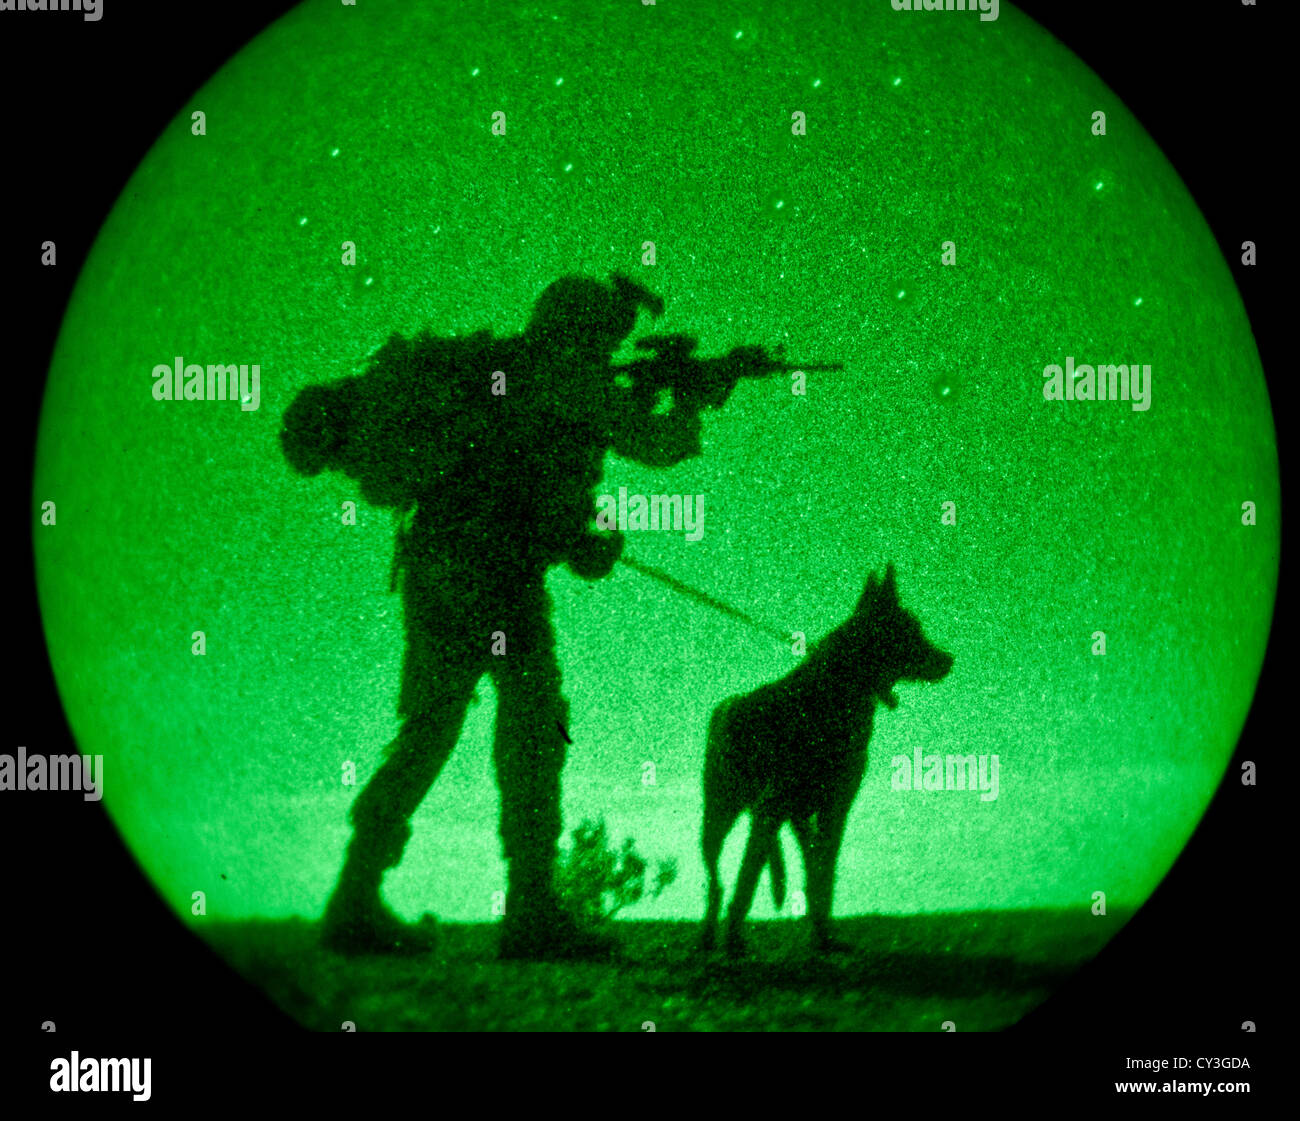 A US Army military working dog handler and his dog Kally take part in night operations training at the US Army Yuma Proving Ground September 24, 2012 in Yuma, Arizona. Stock Photo